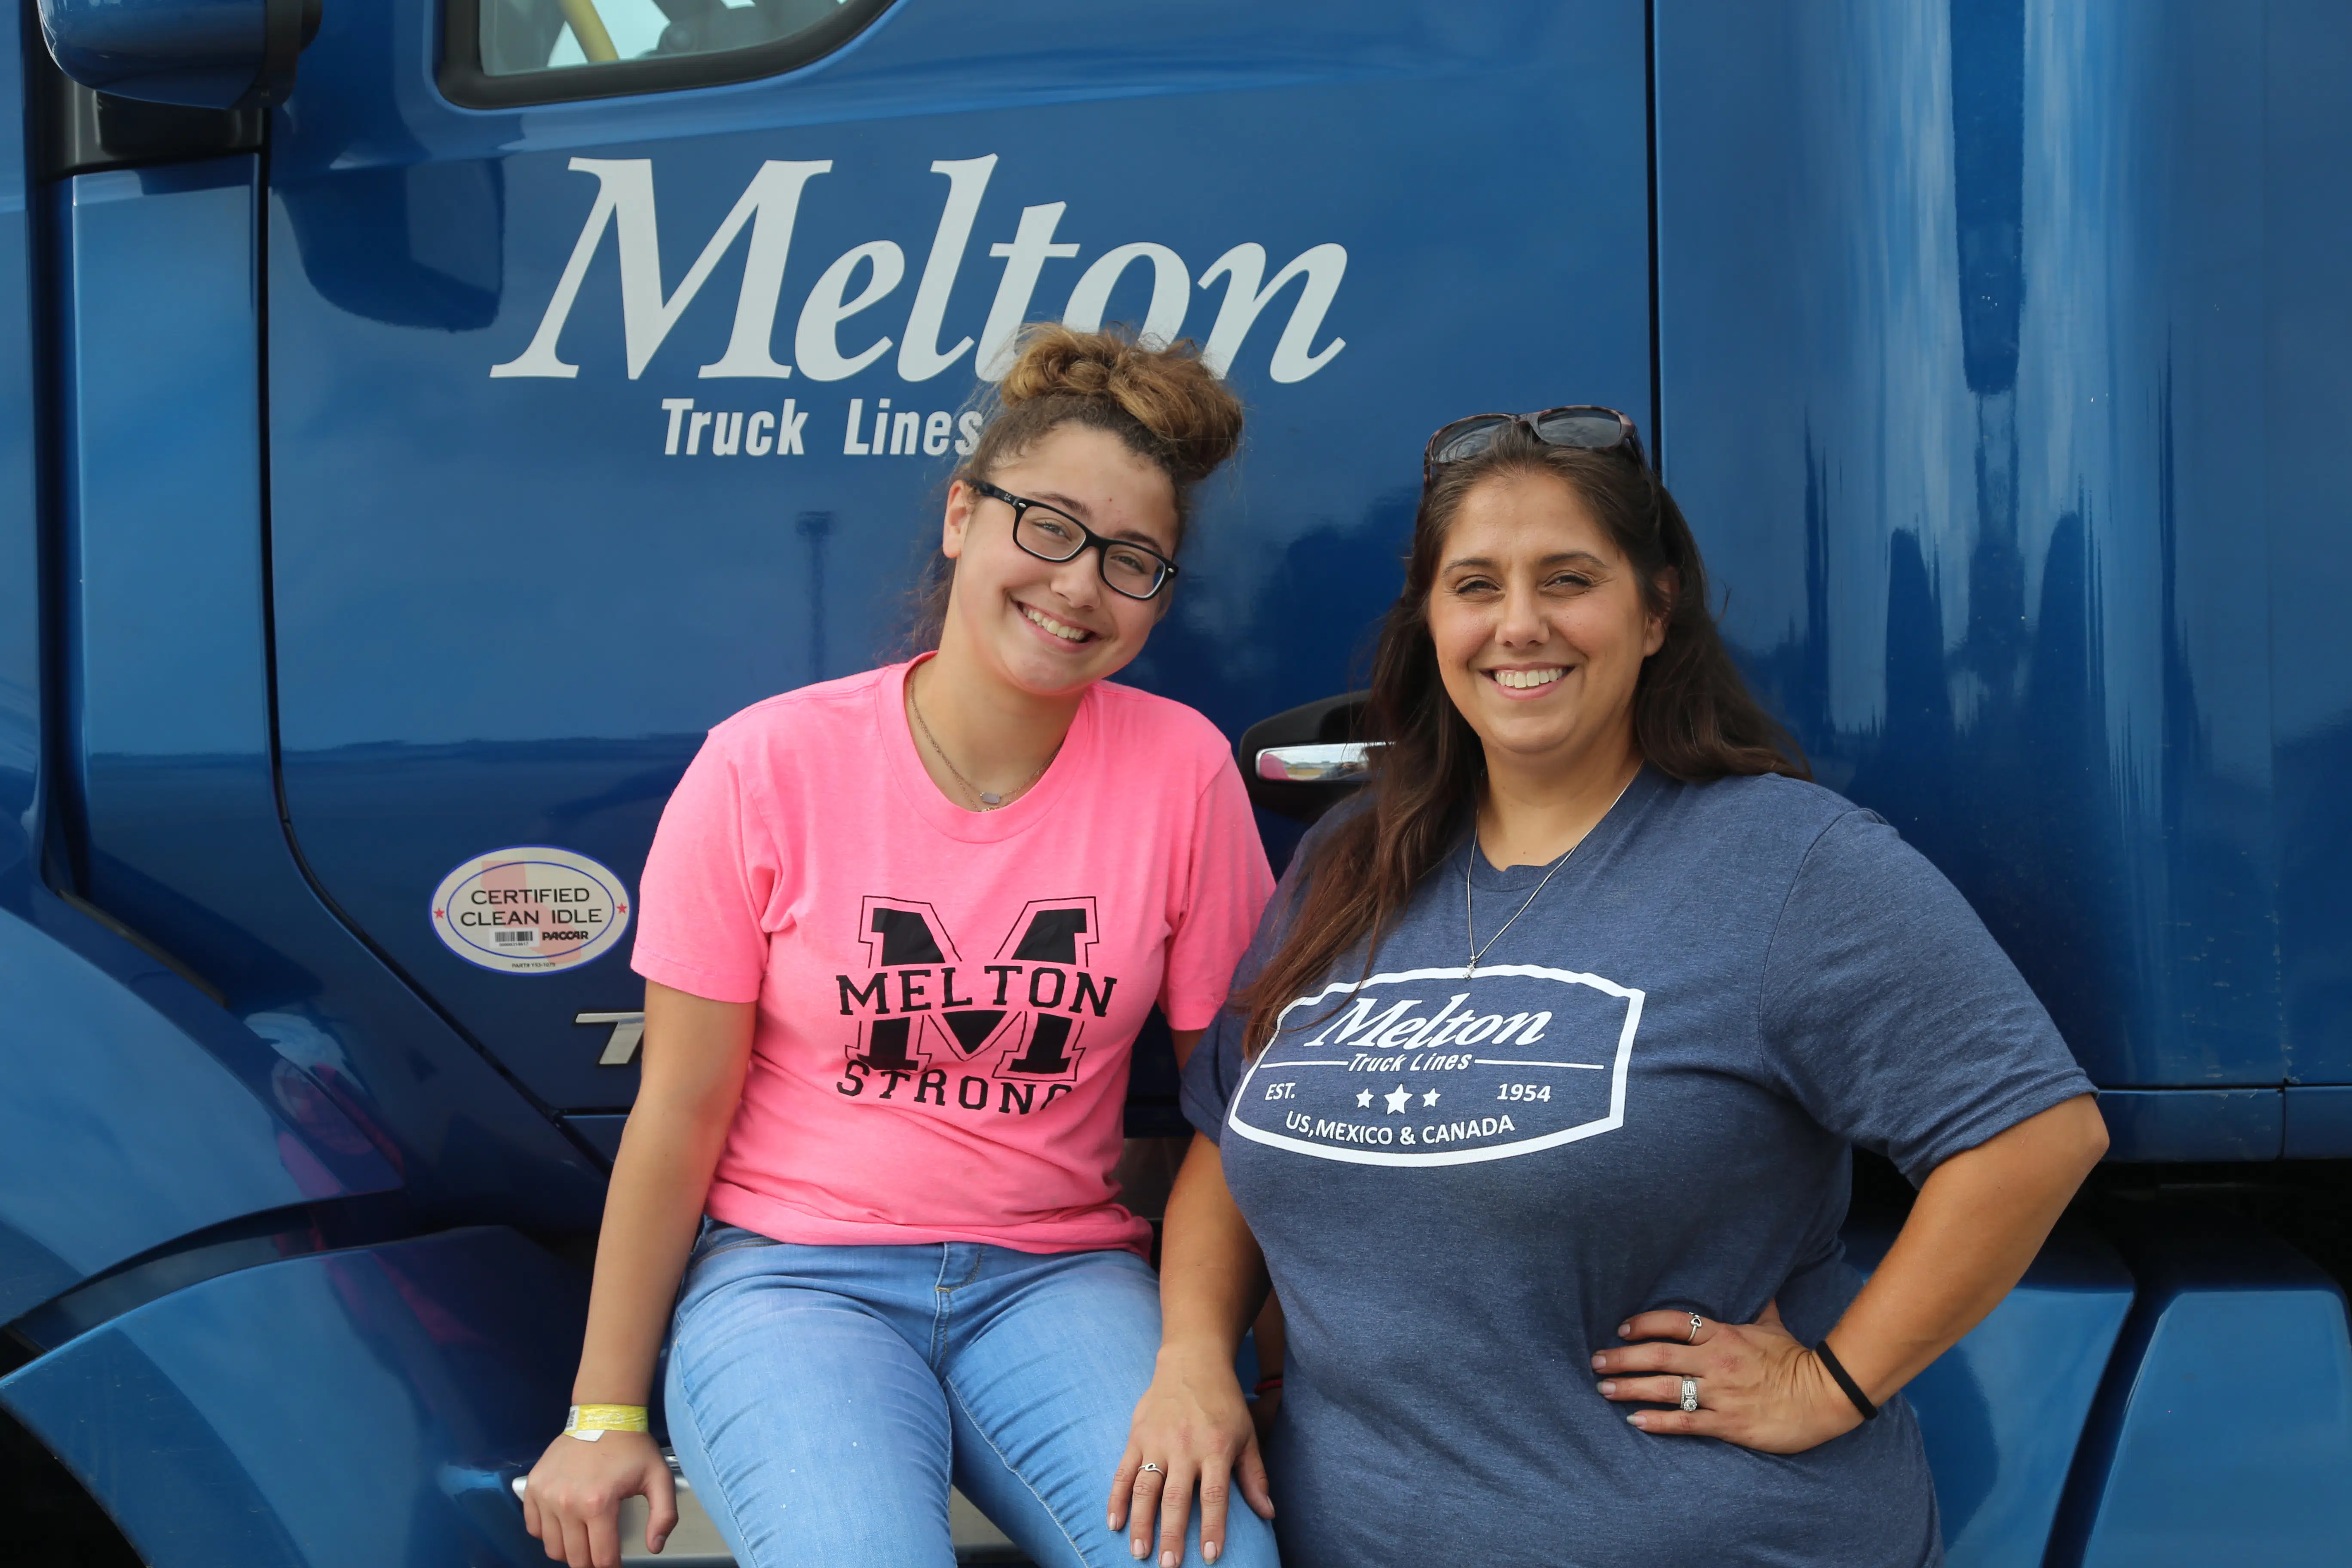 Melton Driver and her daughter standing in front of Melton Flatbed truck